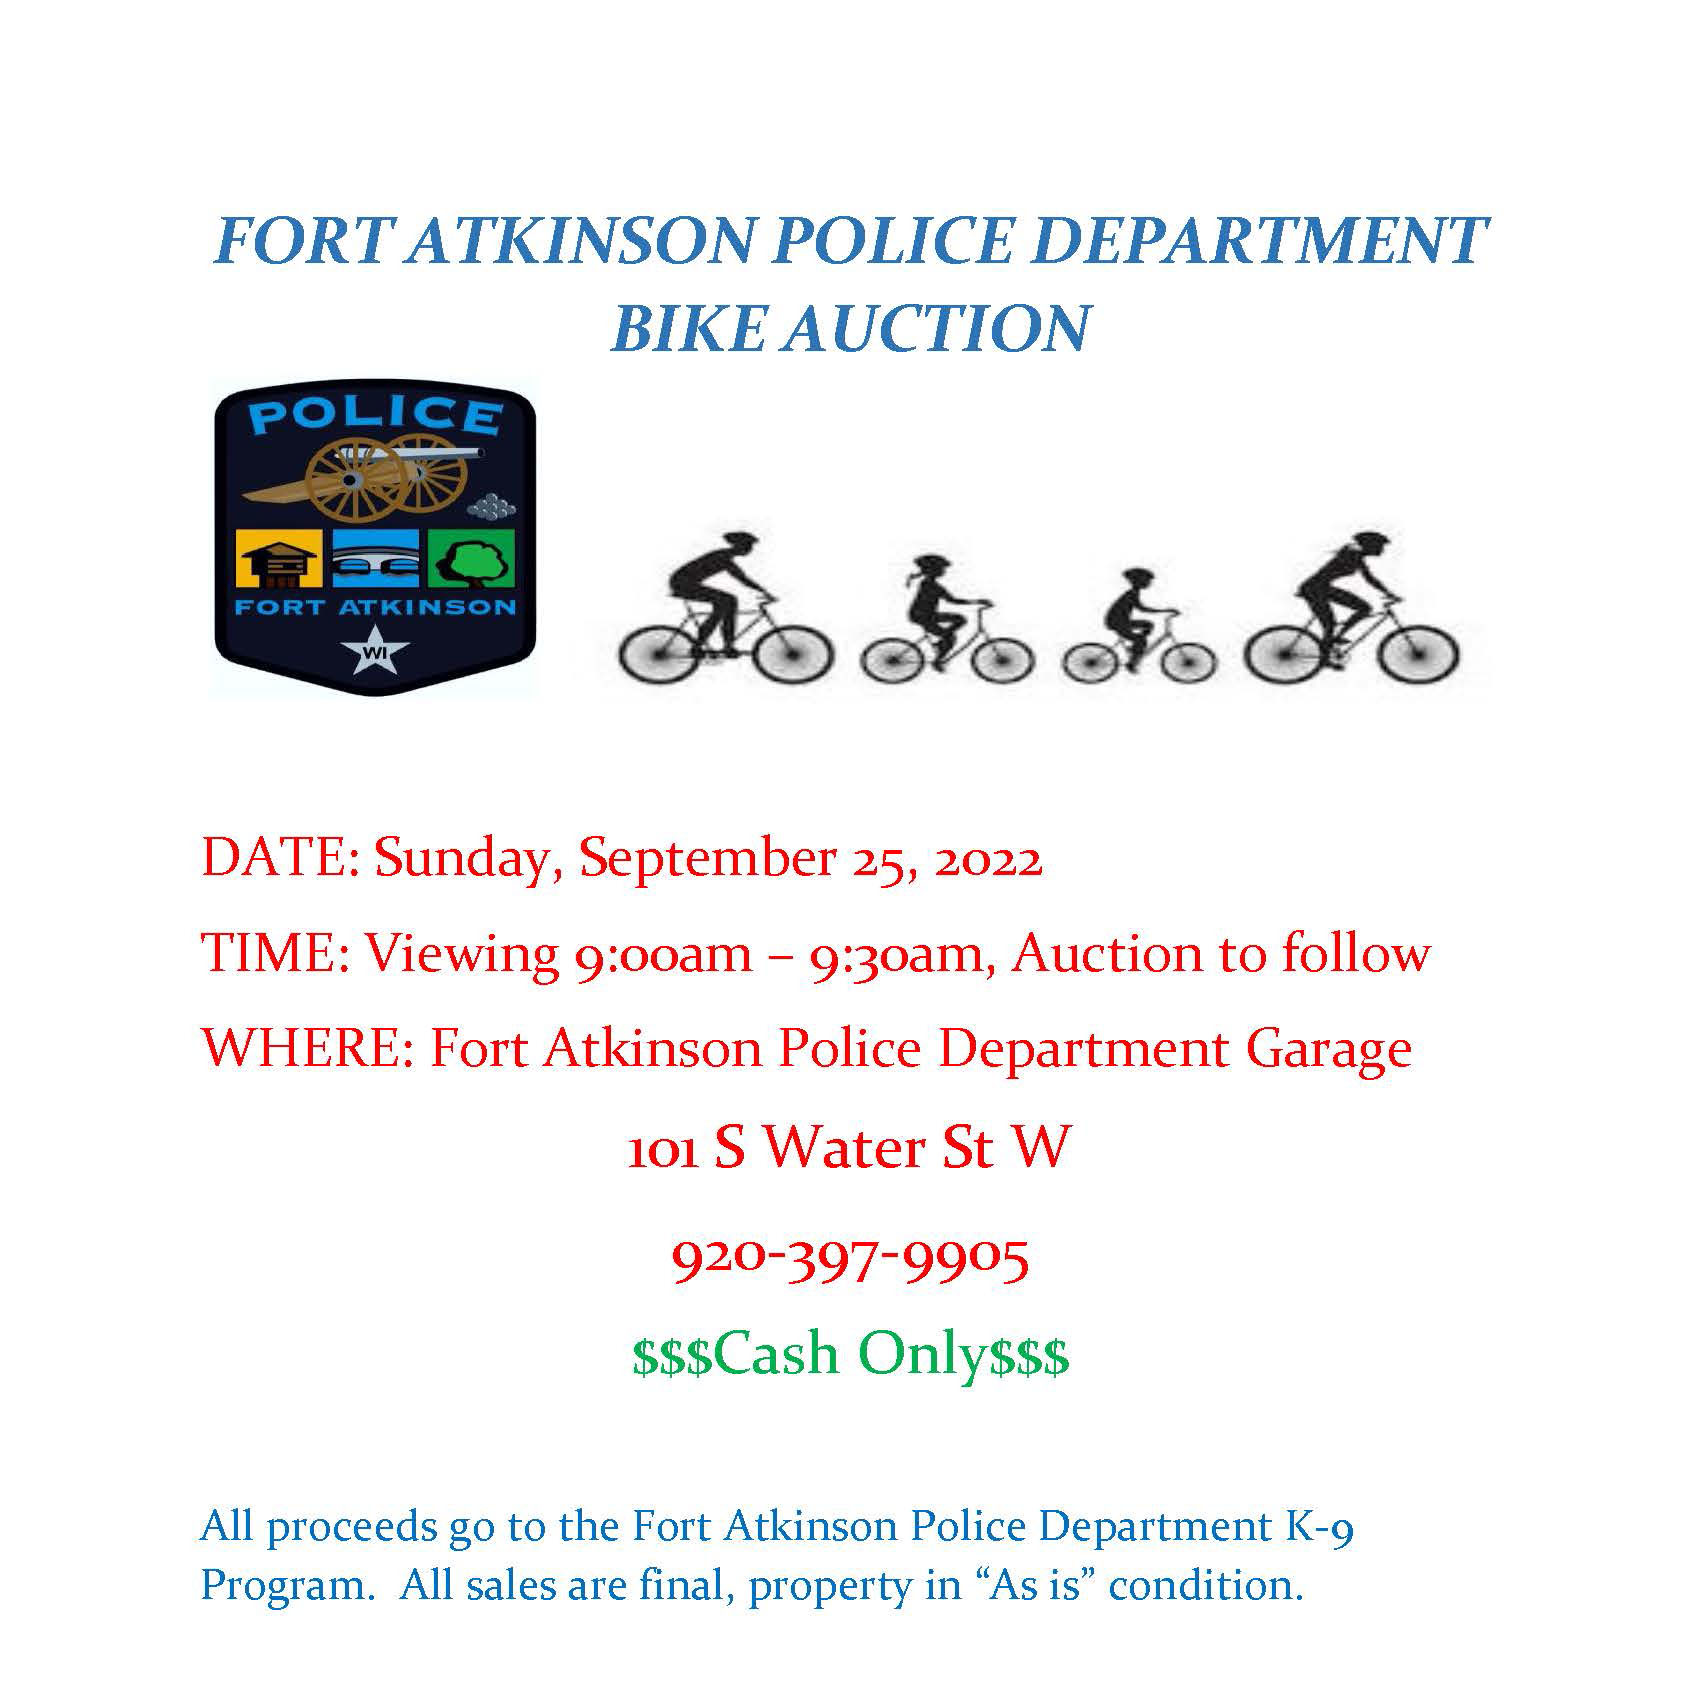 FORT ATKINSON POLICE DEPARTMENT BIKE AUCTION 2022